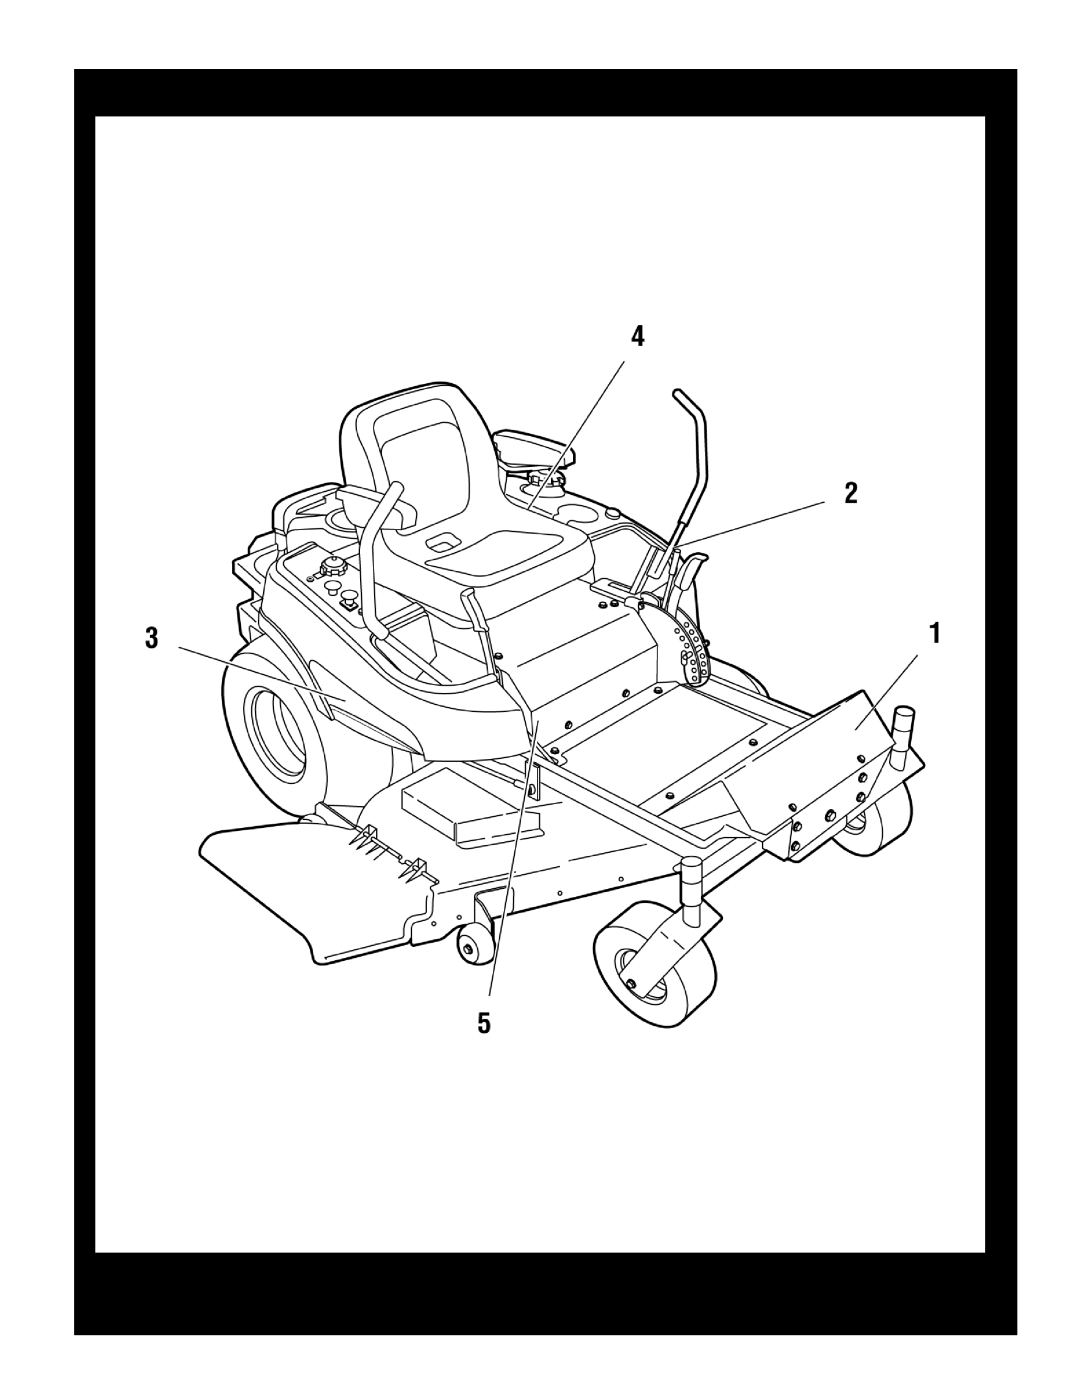 Briggs & Stratton 5900681 manual Decal Group - Brand & Model, Reproduction, Manual No, 5101225, 24HP & 26HP HYDRO DRIVE ZTR 